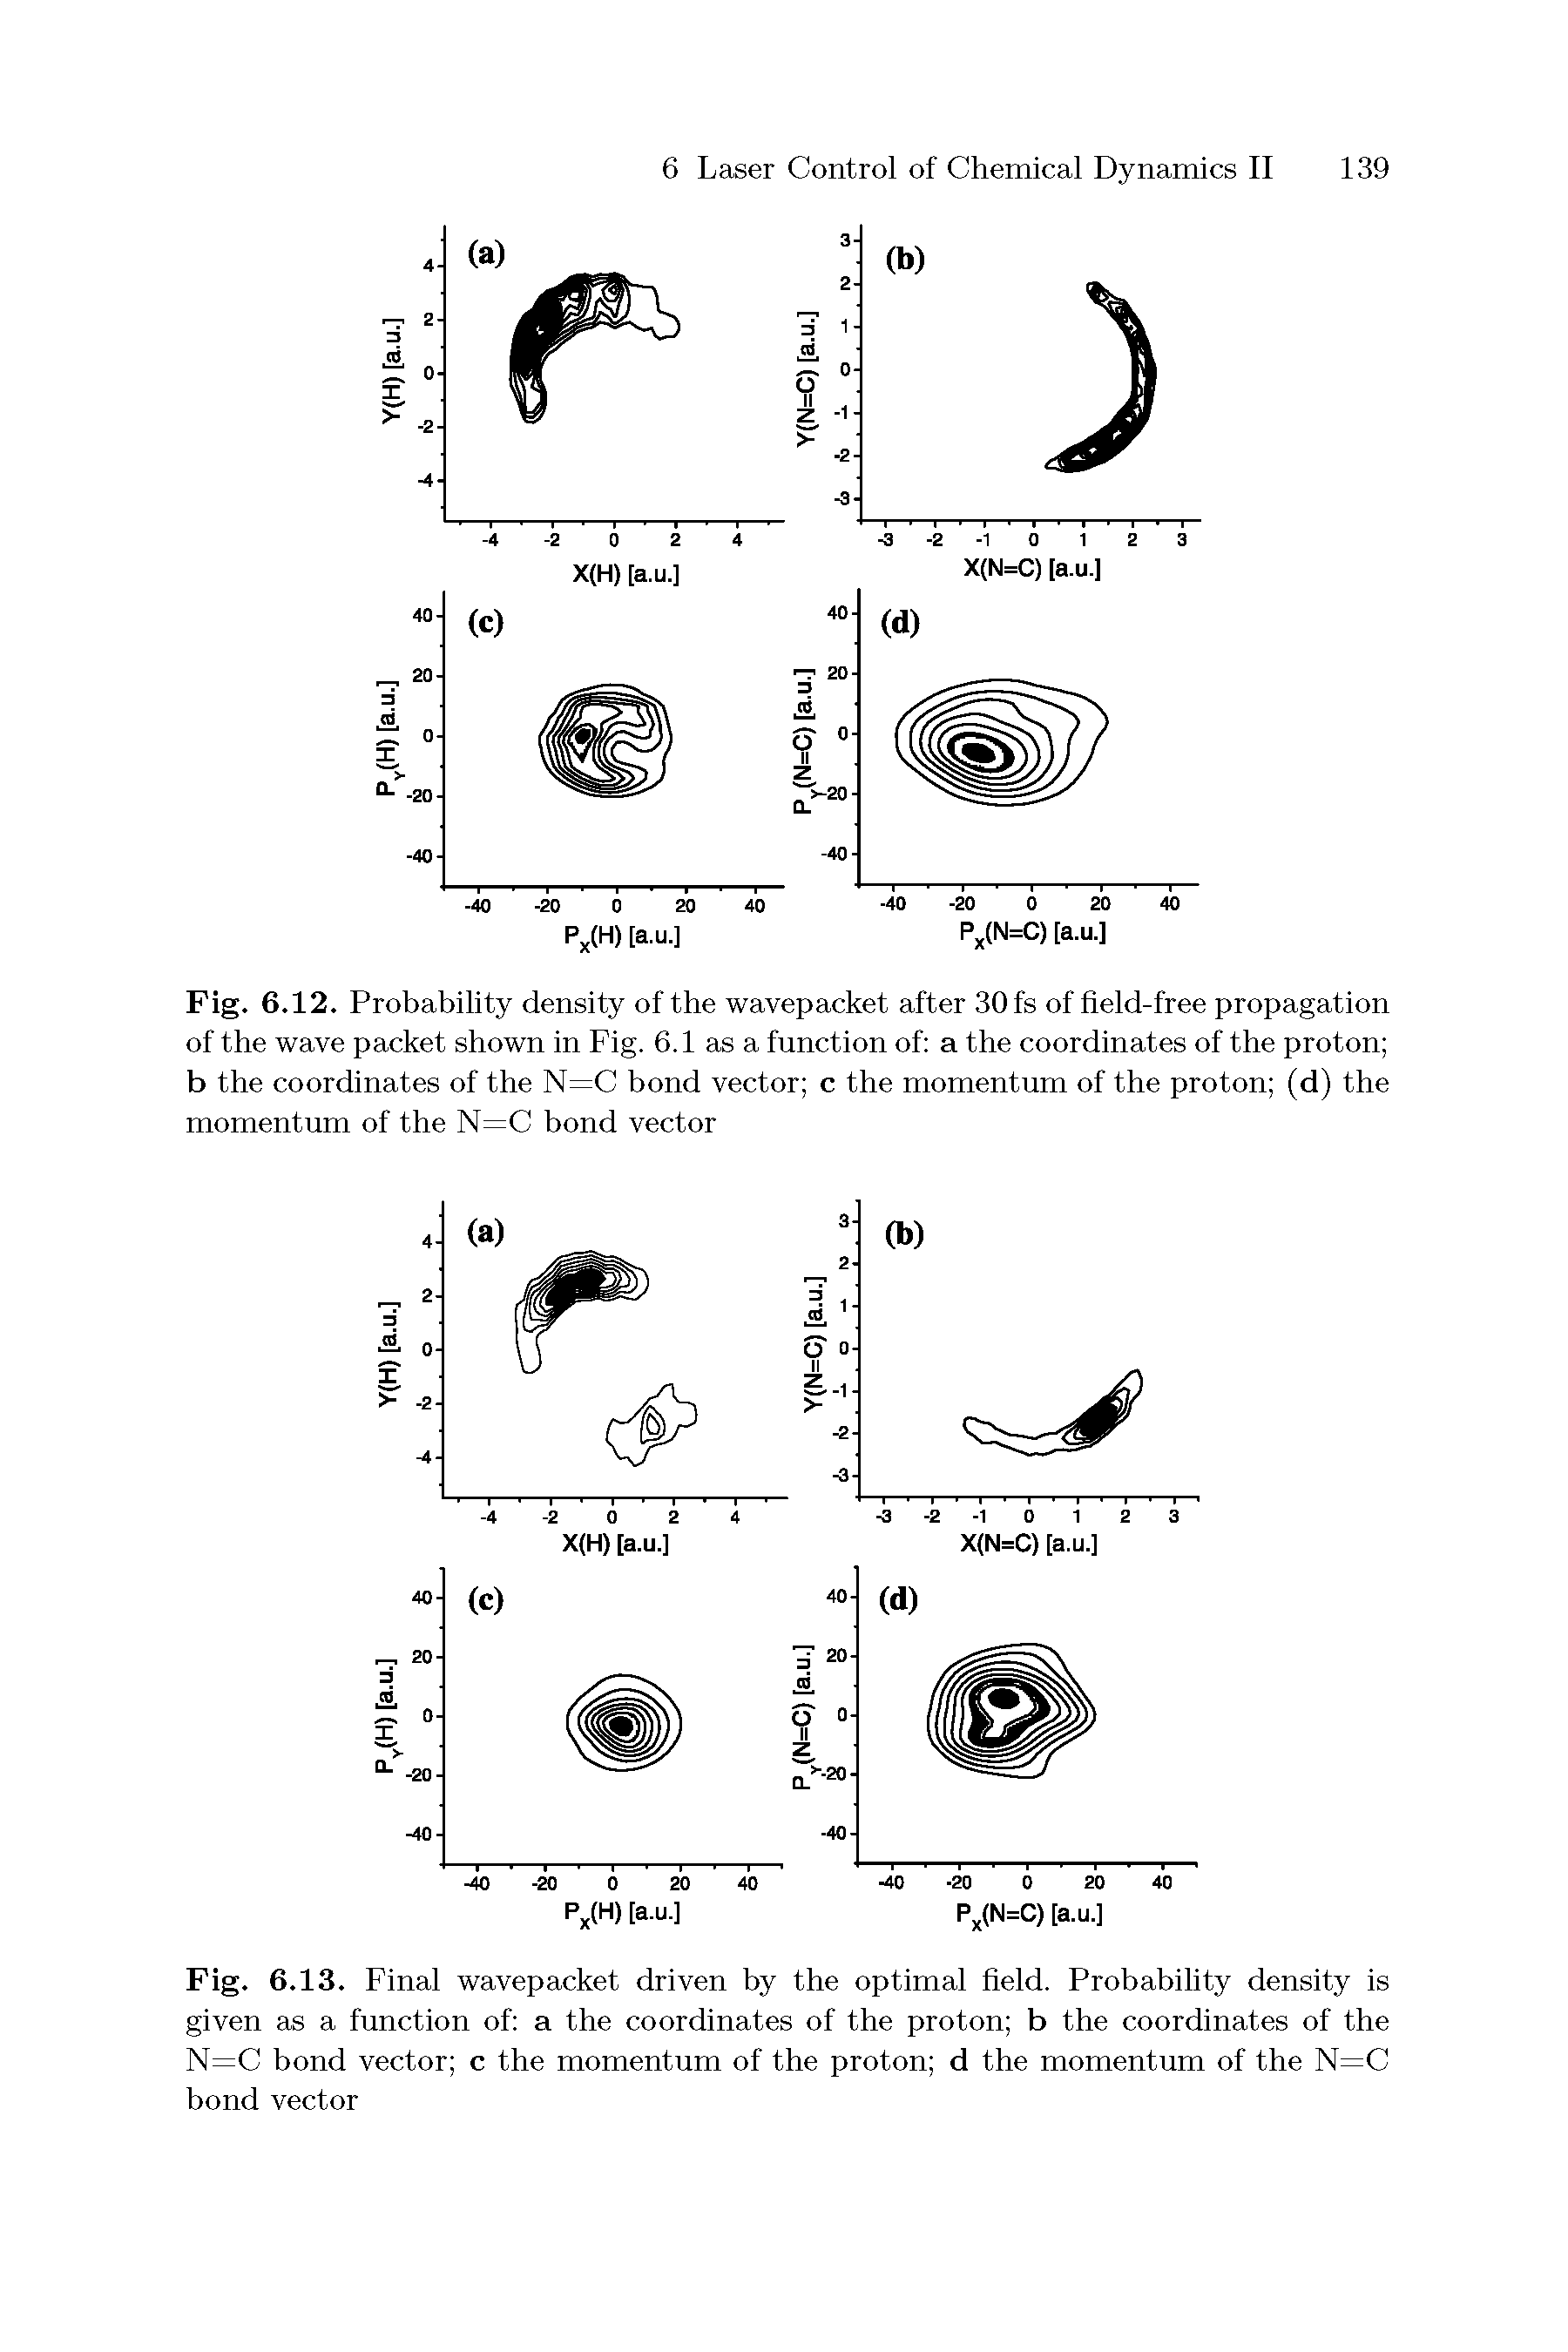 Fig. 6.12. Probability density of the wavepacket after 30 fs of field-free propagation of the wave packet shown in Fig. 6.1 as a function of a the coordinates of the proton b the coordinates of the N=C bond vector c the momentum of the proton (d) the momentum of the N=C bond vector...